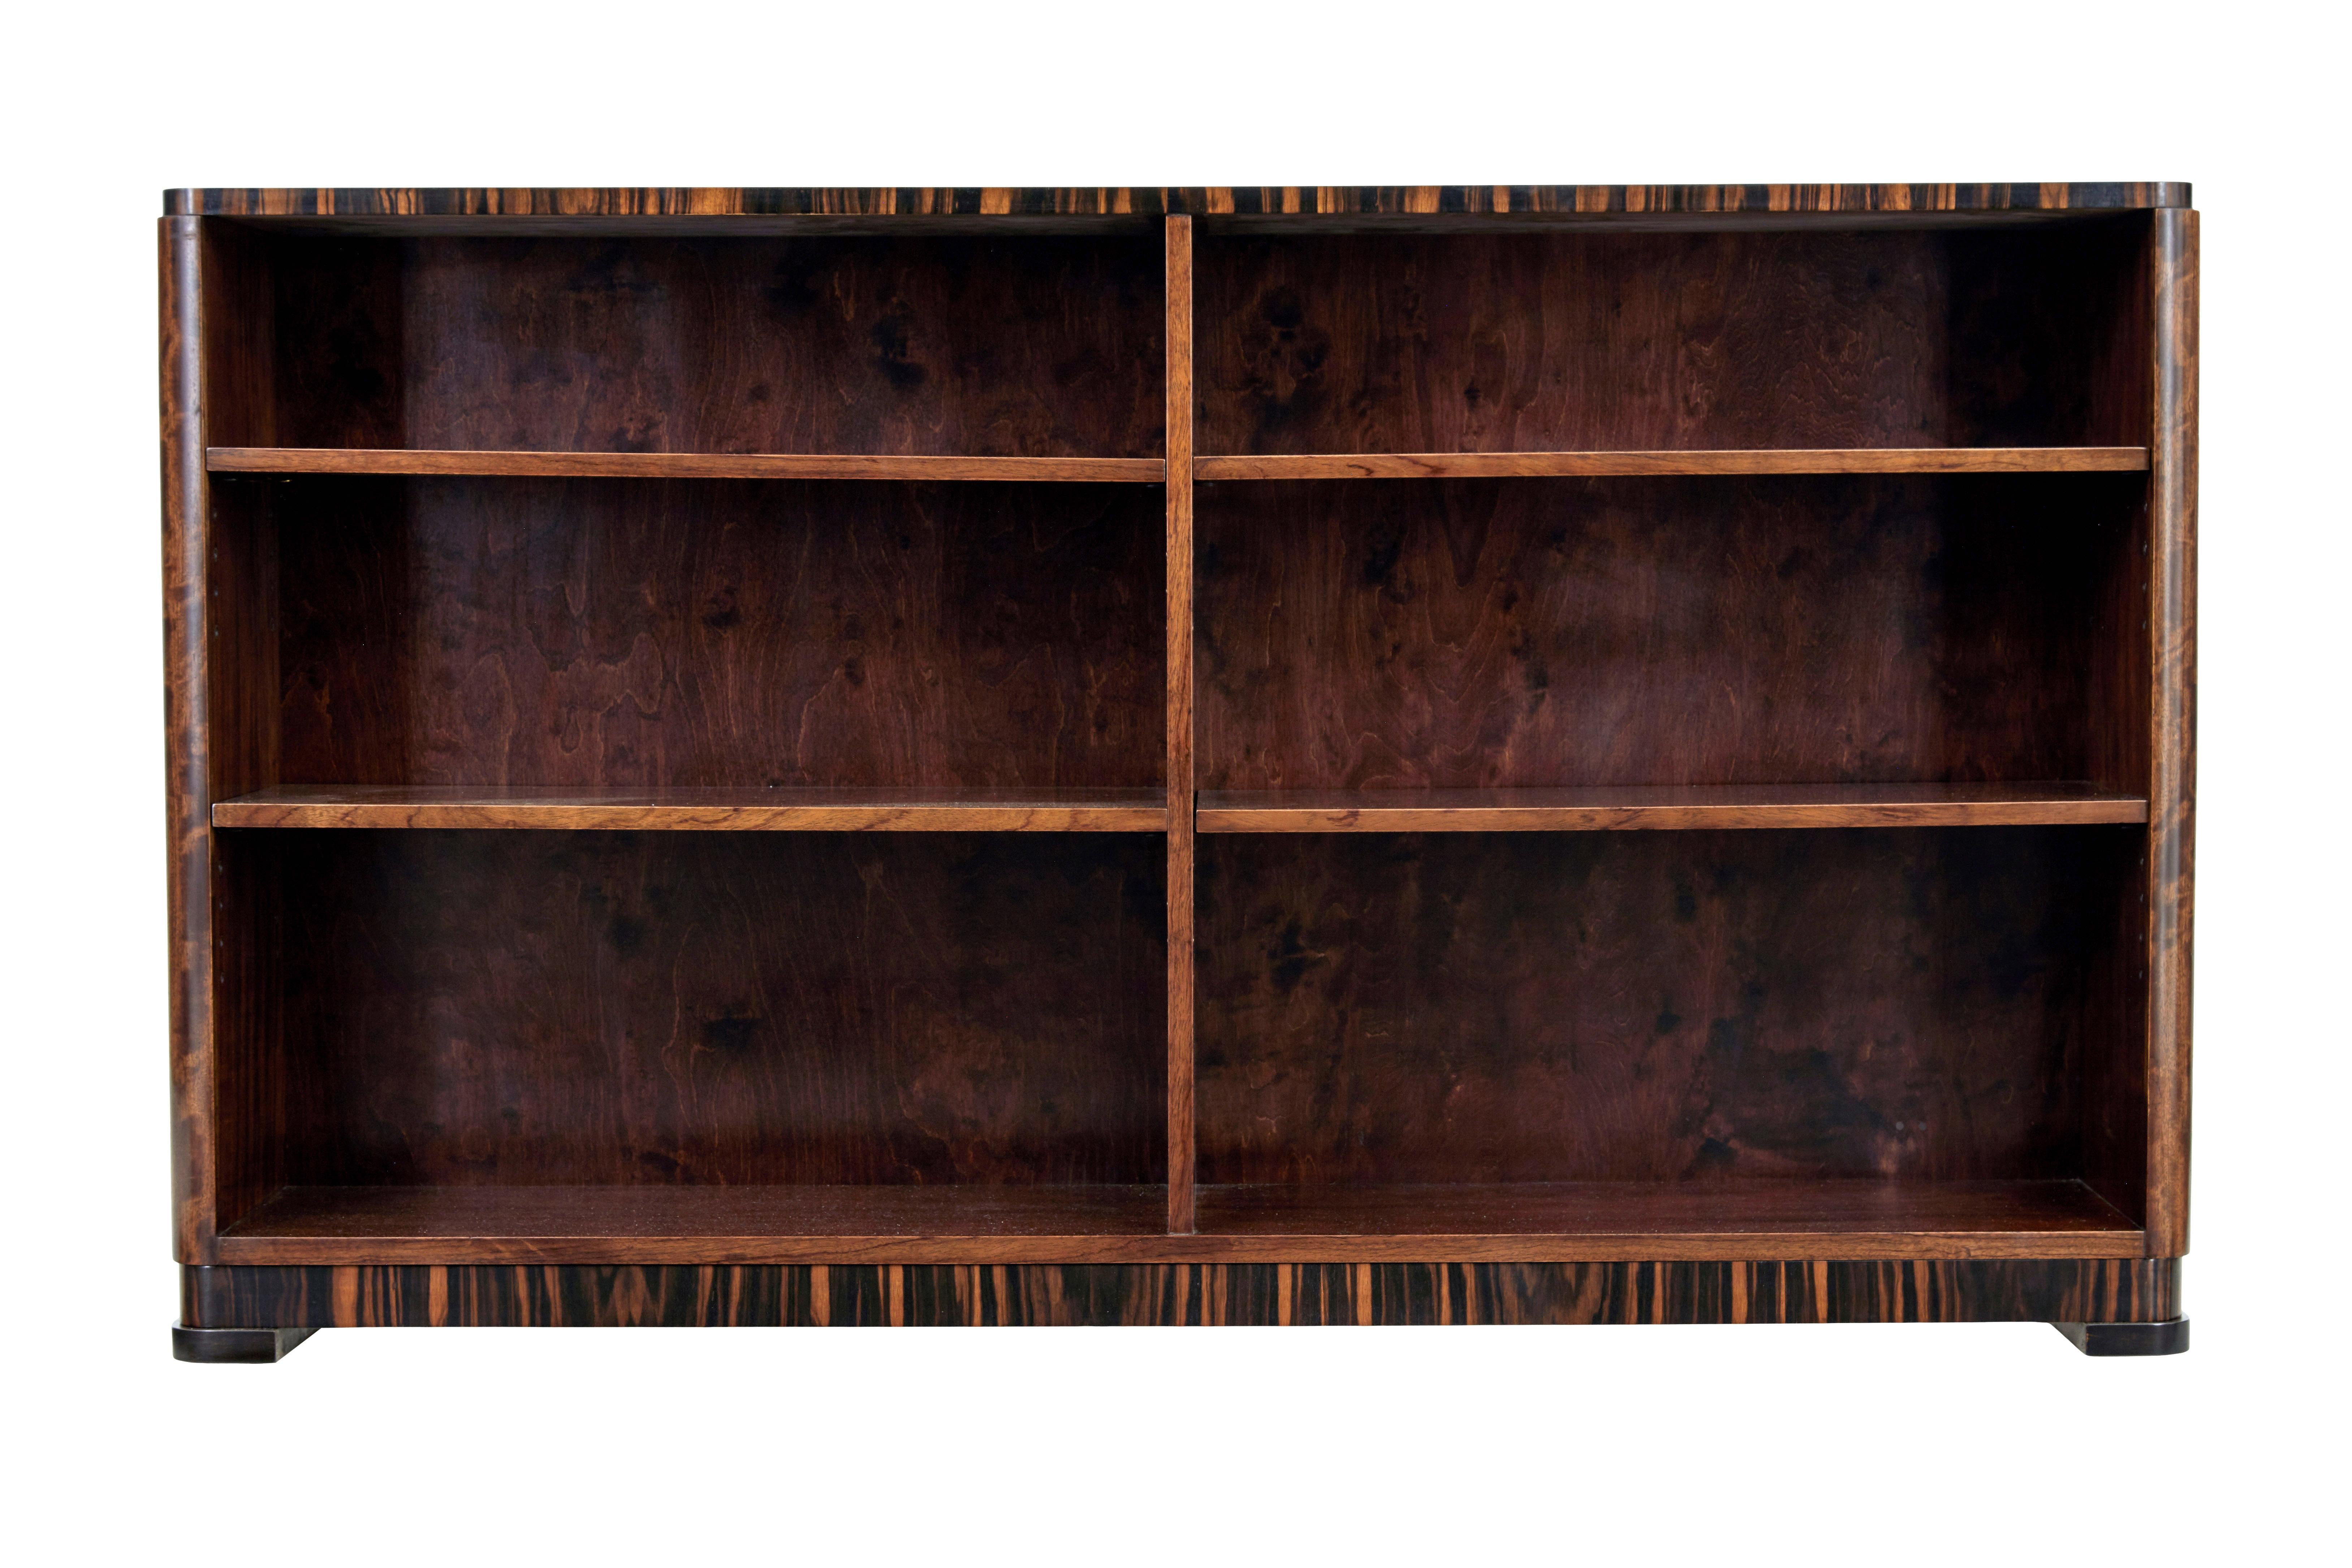 Swedish Art Deco dark birch open bookcase, circa 1930.

Beautiful open bookcase made to a high standard. Rectangular shape made in birch which has been stained the colour of walnut. Top edge with walnut cross-banding around the top edge.

Main